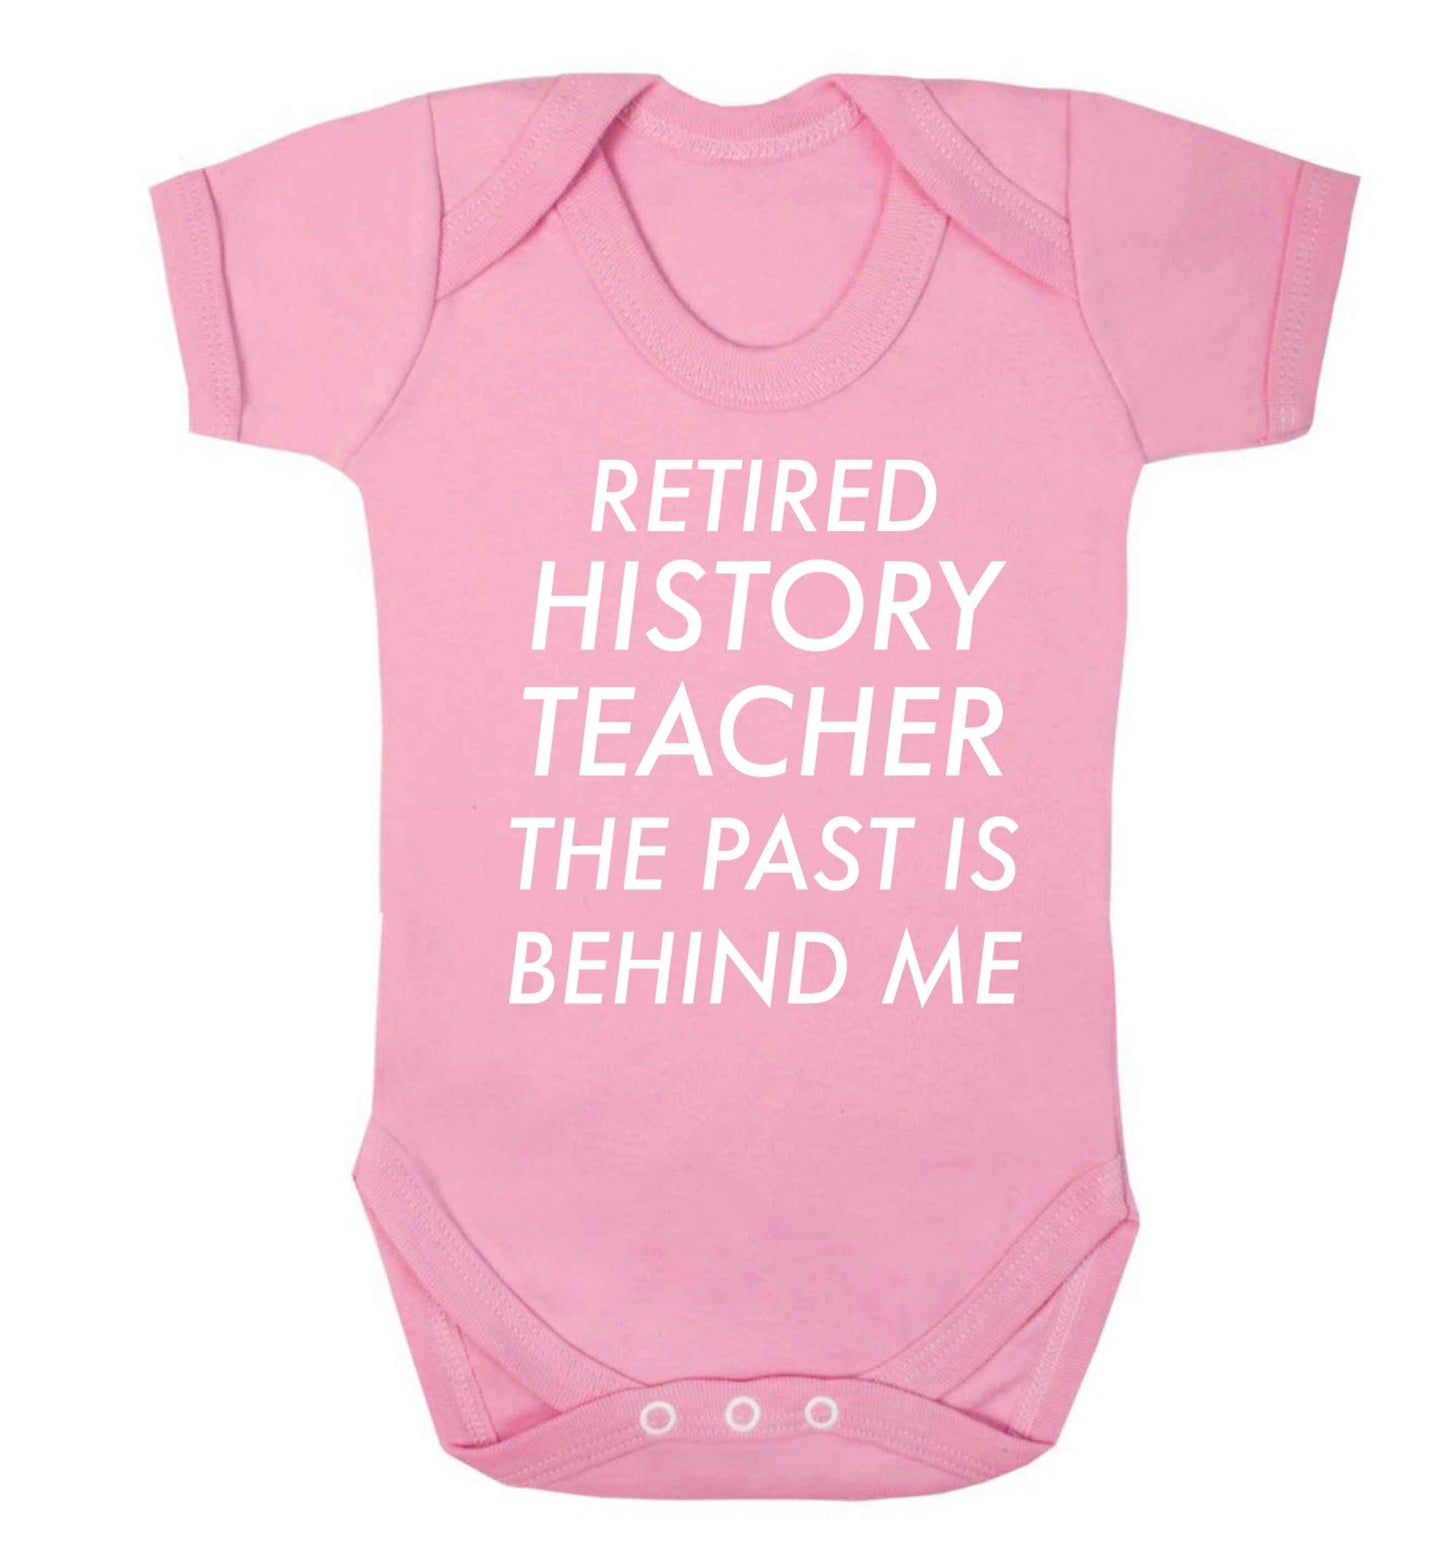 Retired history teacher the past is behind me Baby Vest pale pink 18-24 months